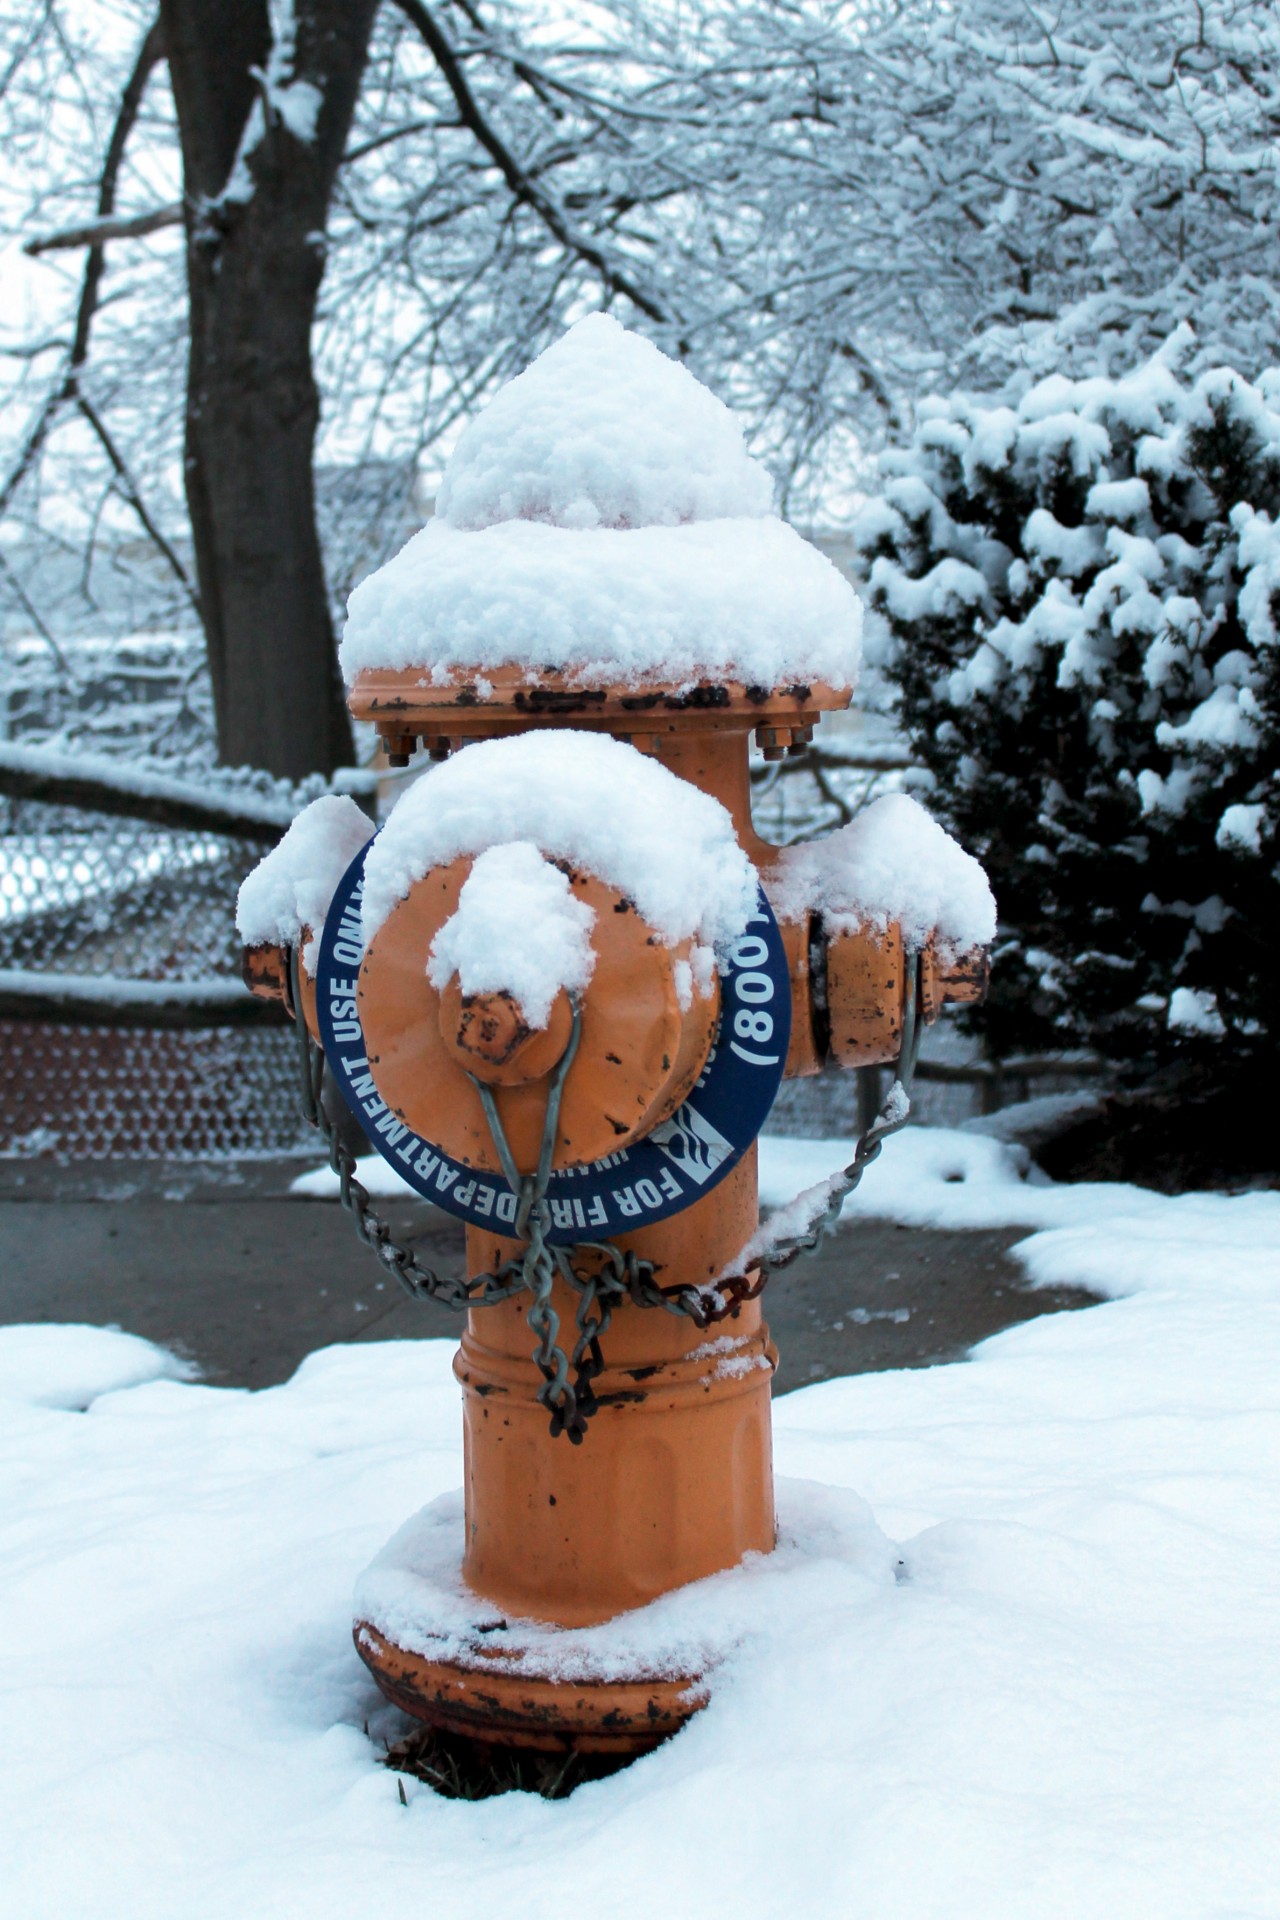 Snow Covered Fire Hydrant In Winter - I really appreciate your premium download!